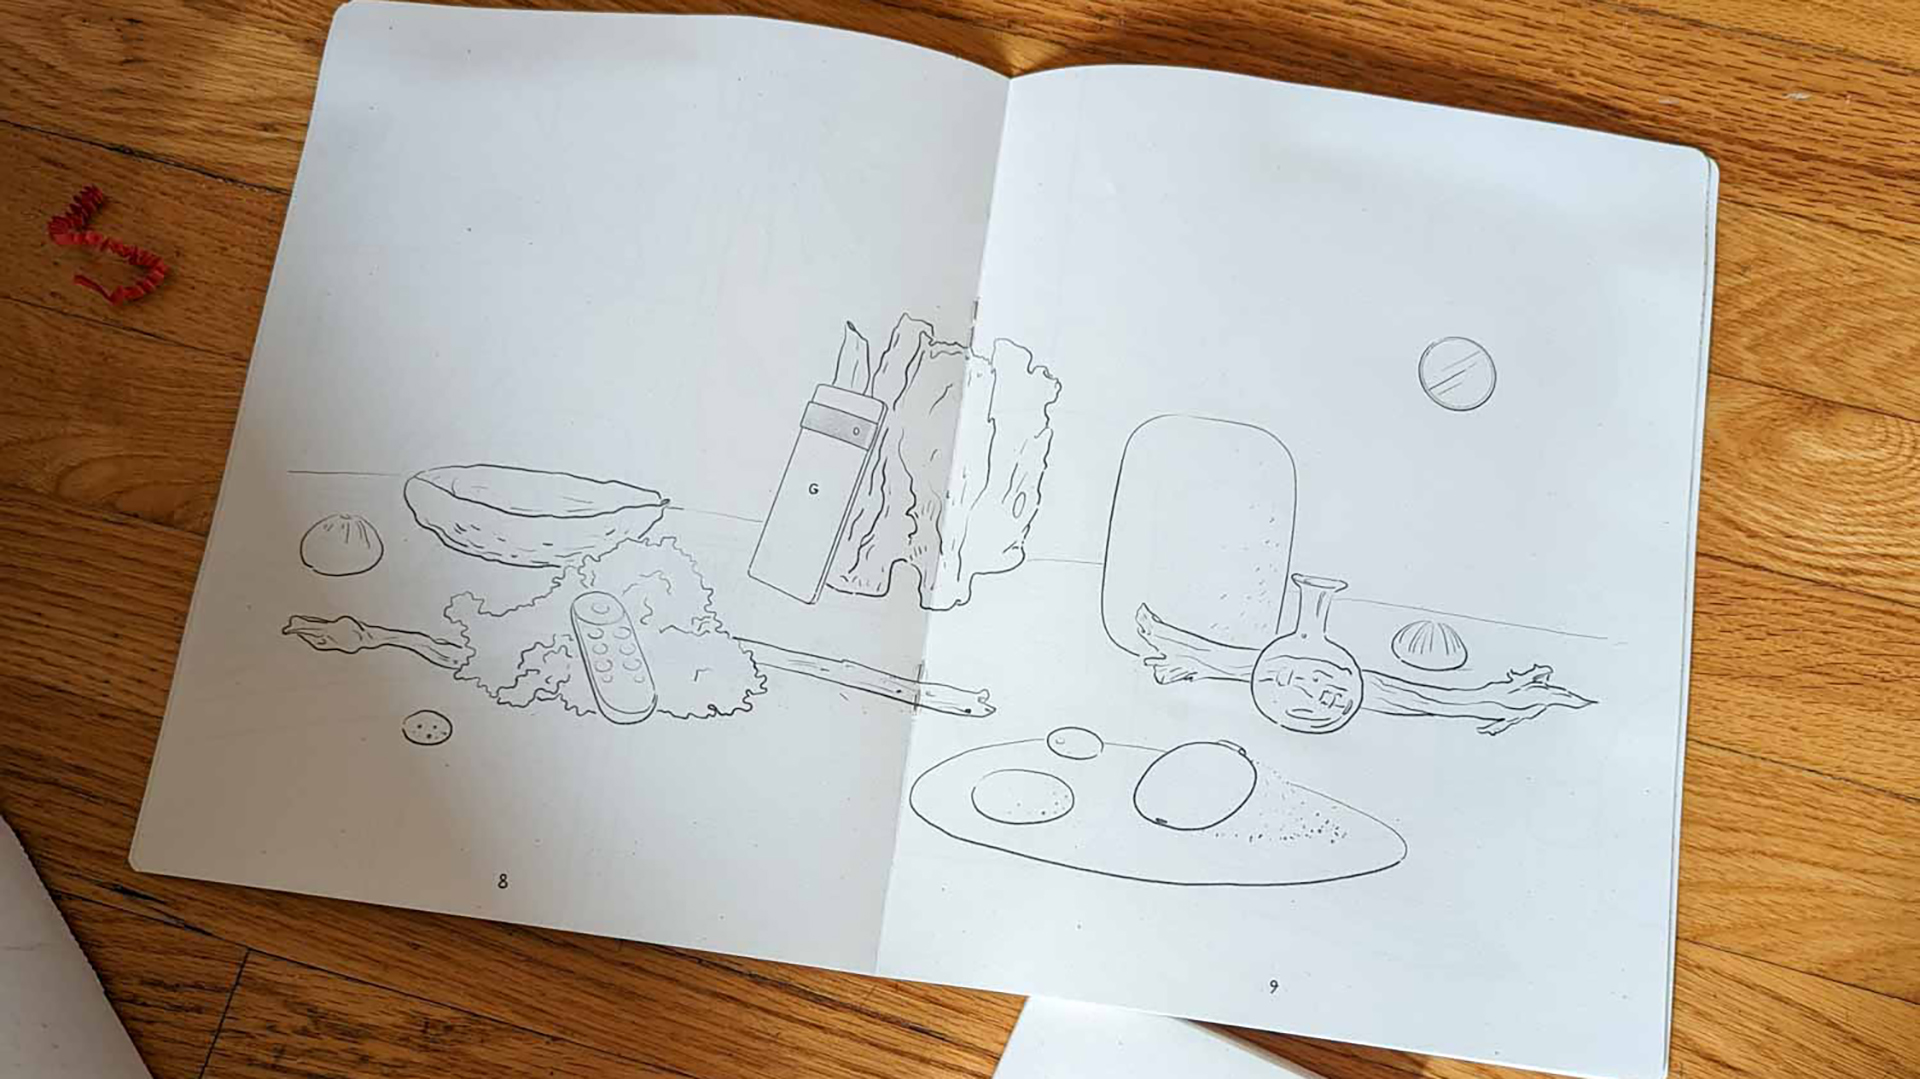 Google mistakenly lists ‘Pixel 6a’ in coloring book for Superfans